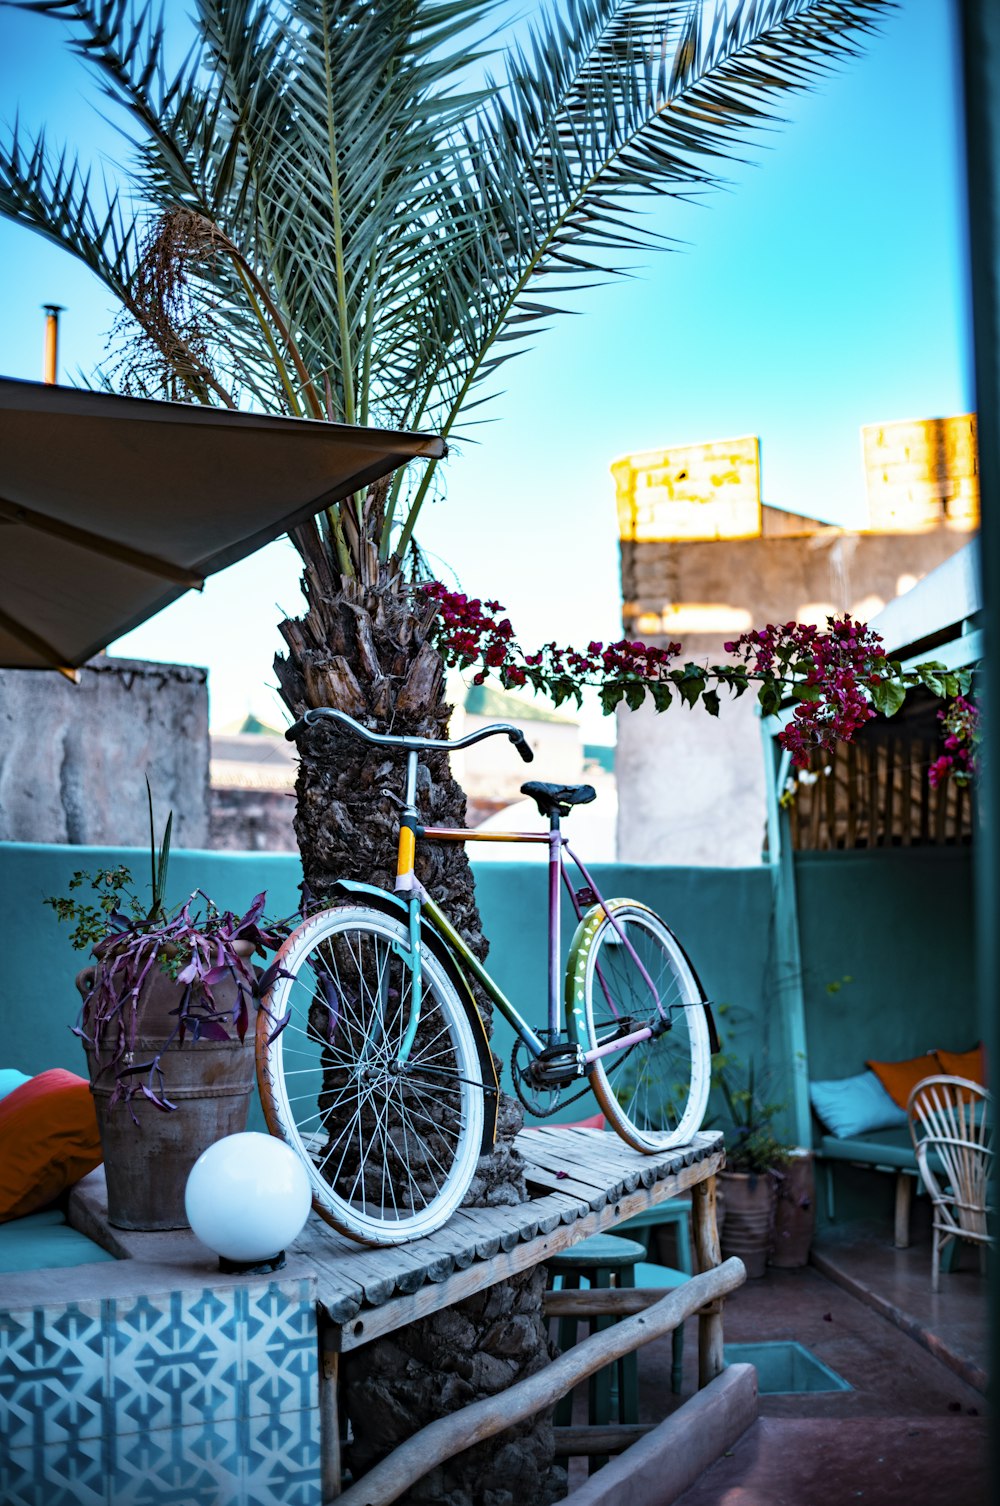 a bicycle is parked on a bench next to a palm tree